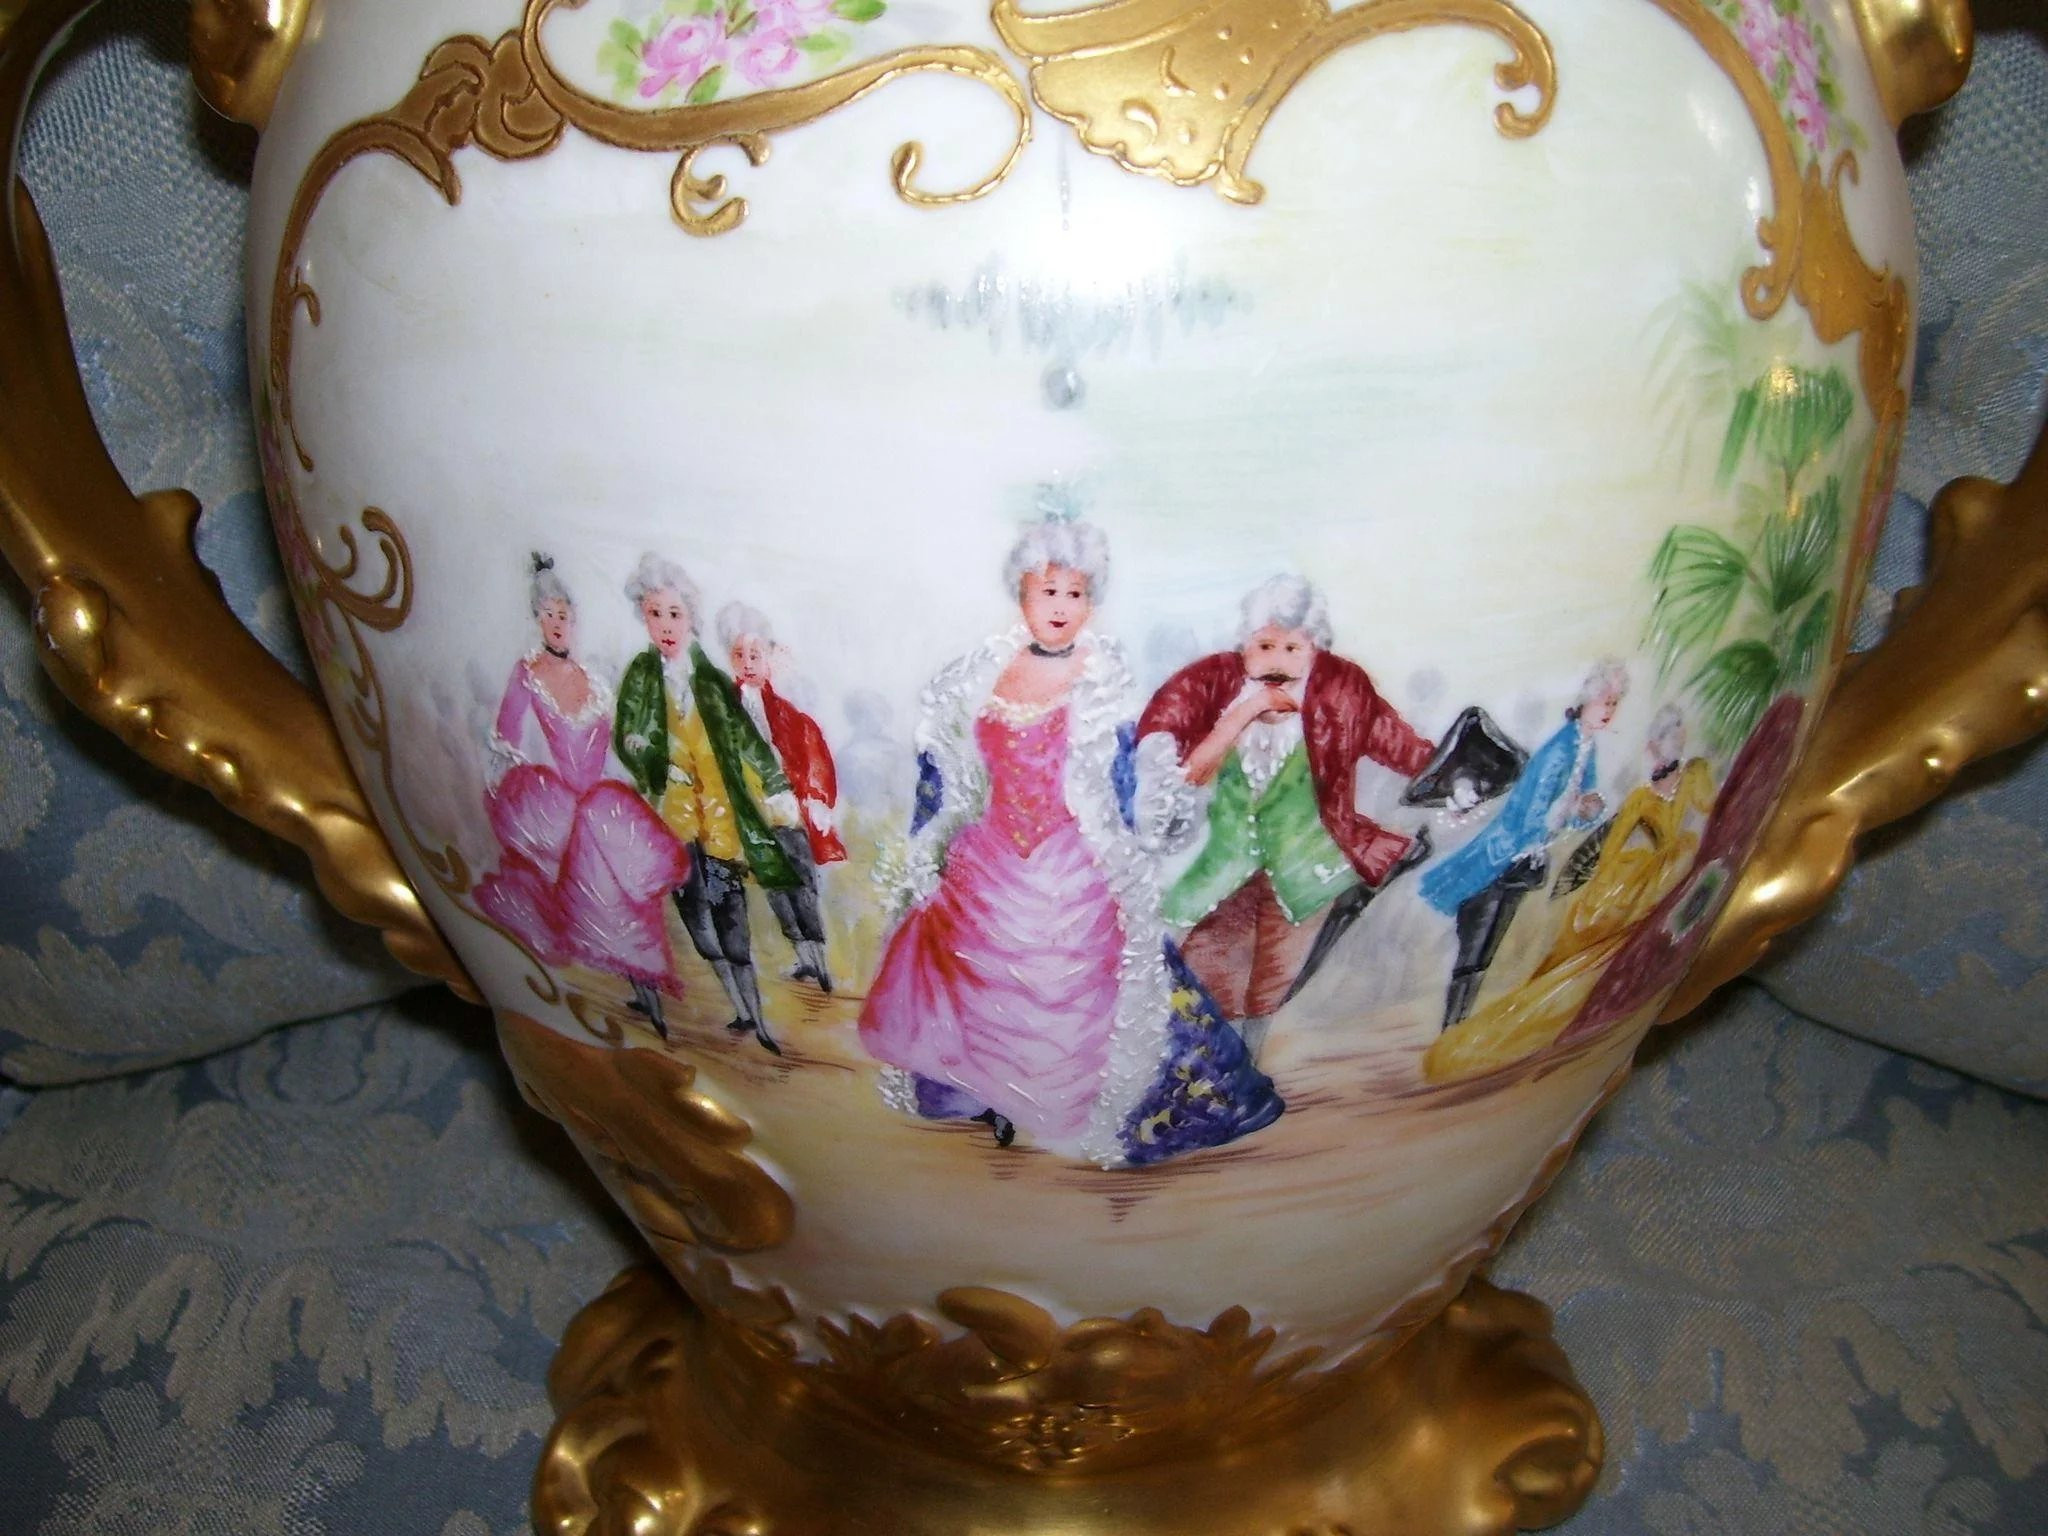 27 Awesome Limoges Vase Prices 2024 free download limoges vase prices of gorgeous huge jean pouyat limoges vase with gilded handles and in click to expand